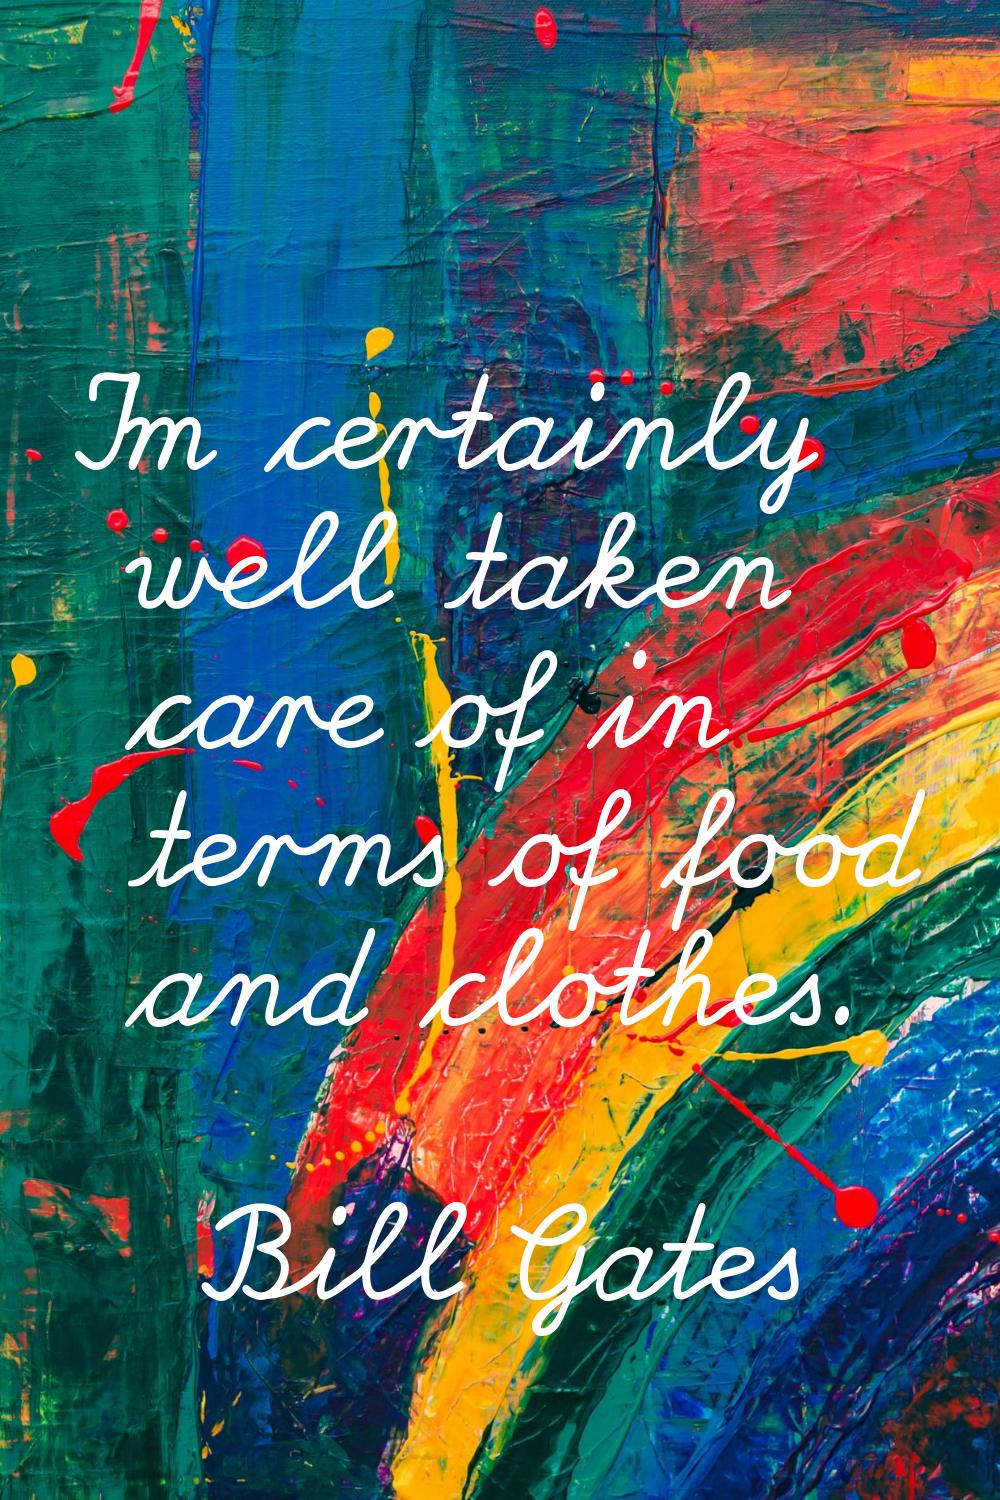 I'm certainly well taken care of in terms of food and clothes.